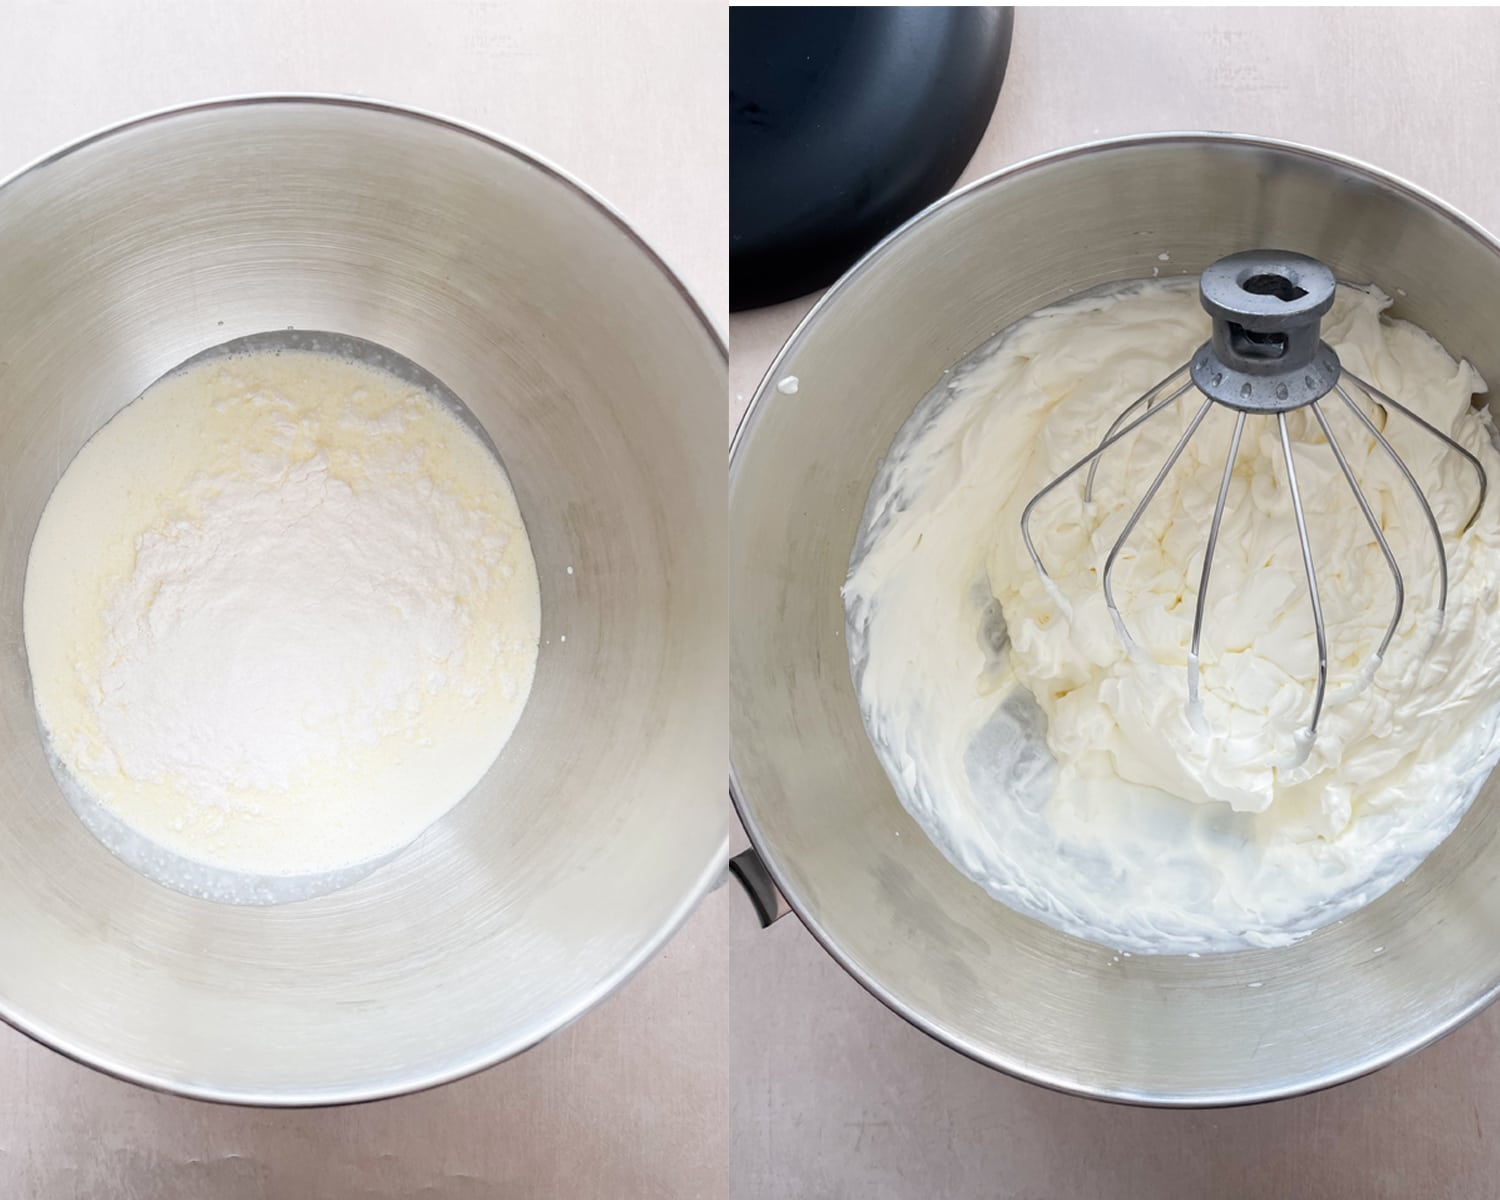 Process images for making stabilized whipped cream for Black Forest Cake. 